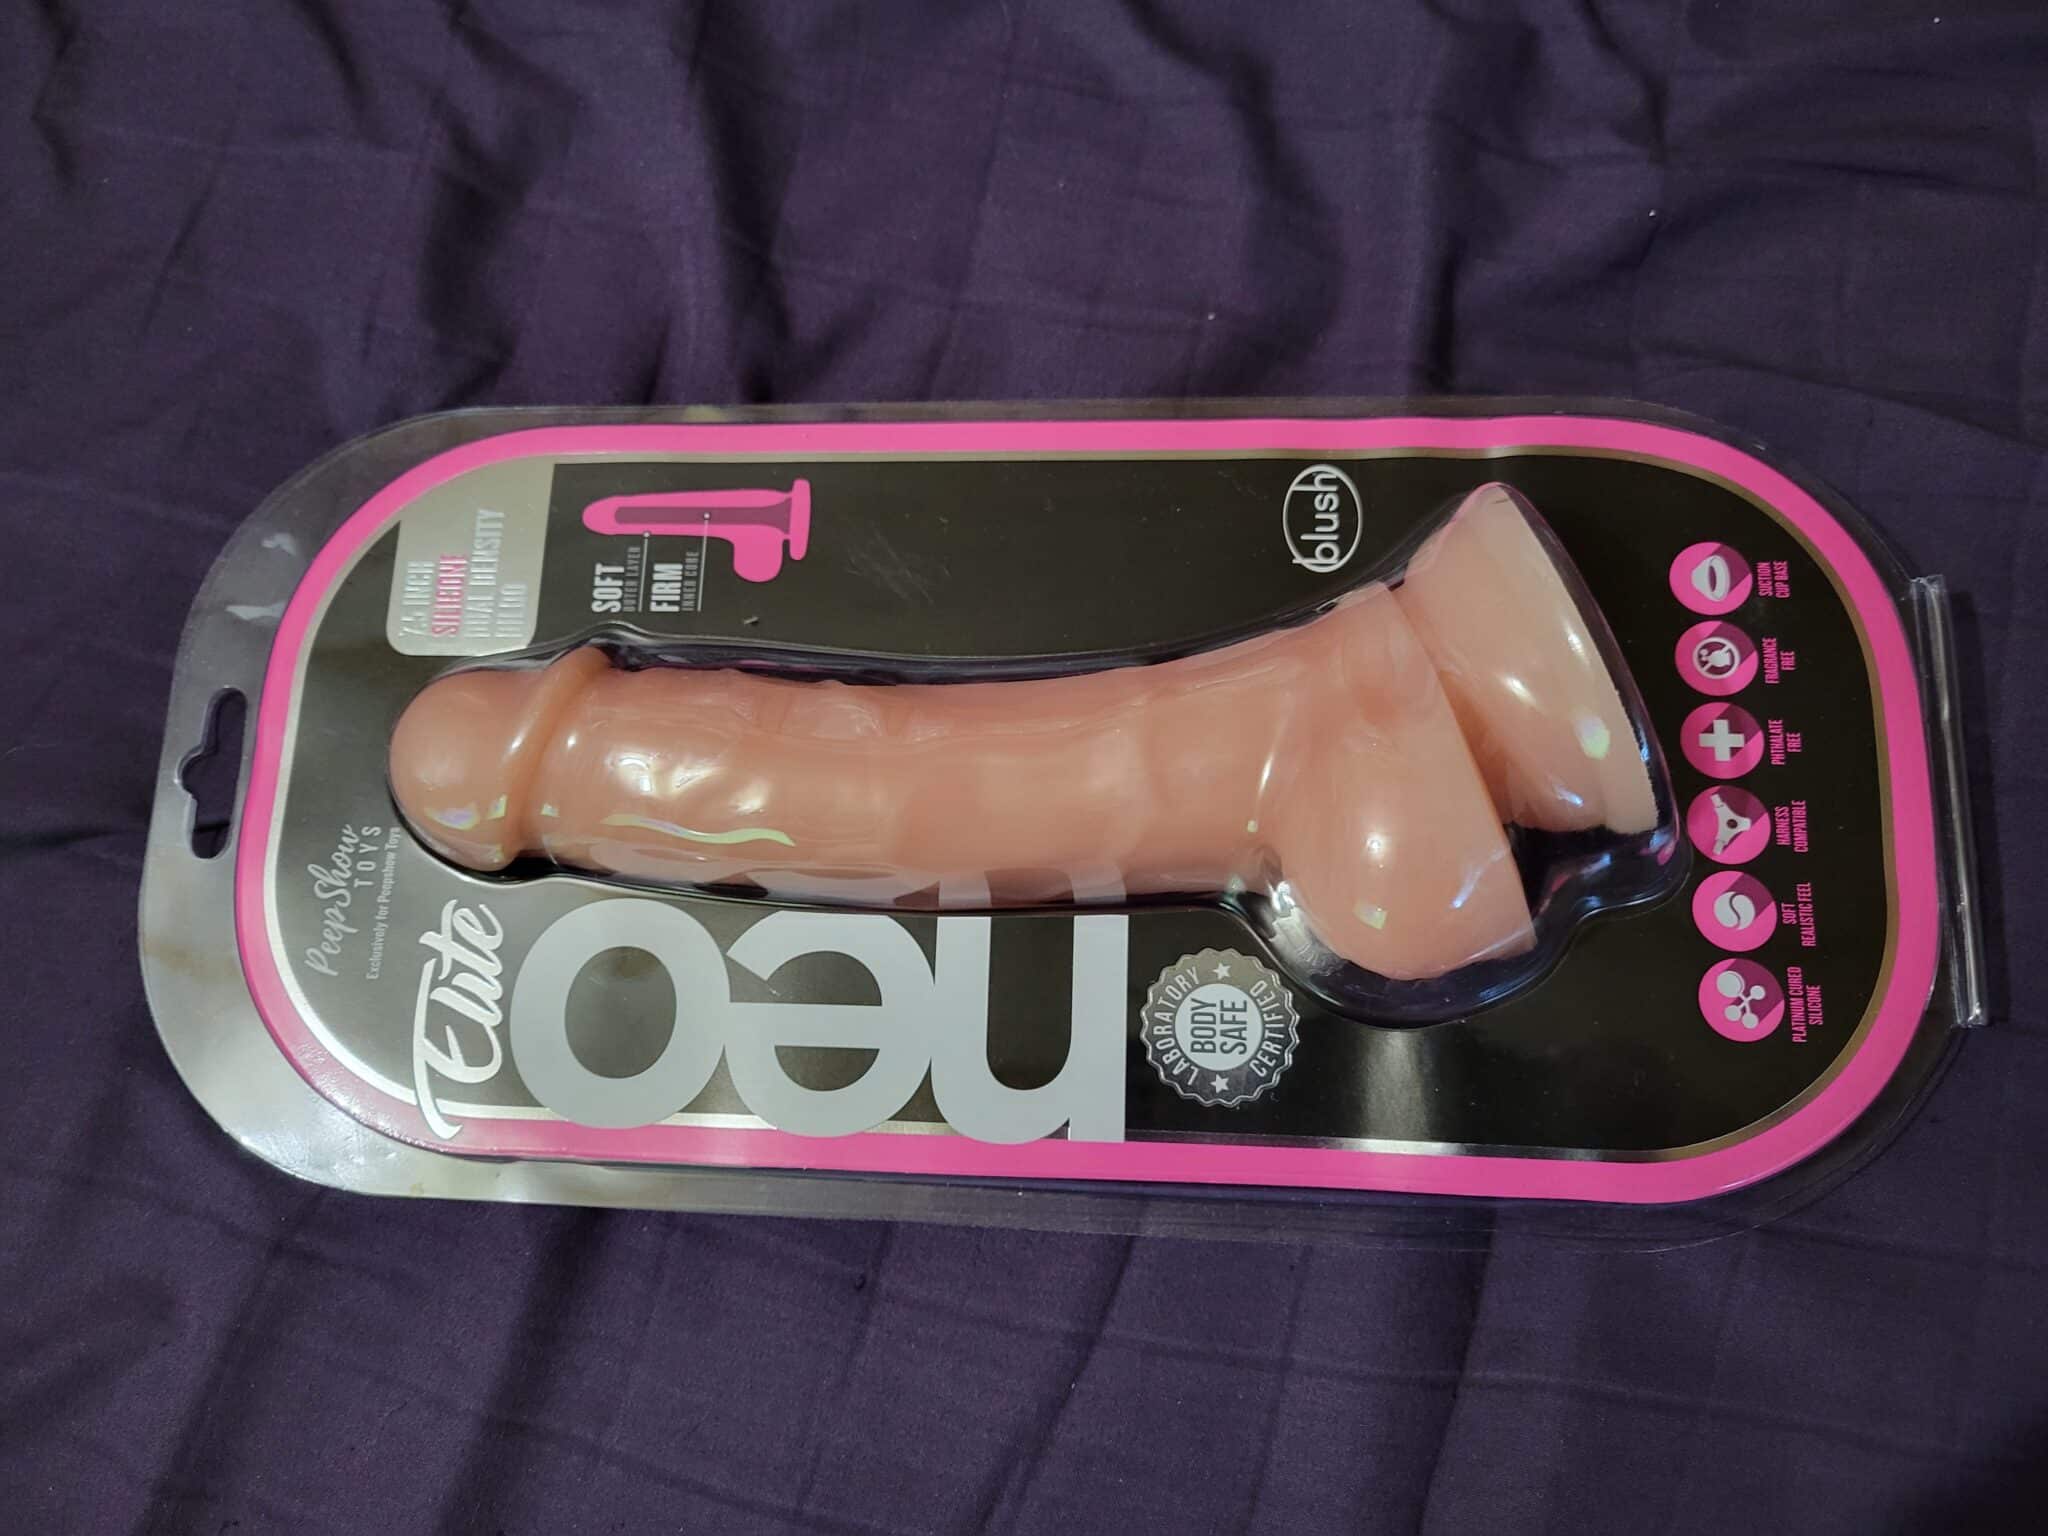 Blush Neo Elite 7.5 Inch Dildo With Balls Save or splurge: Looking at the price tag